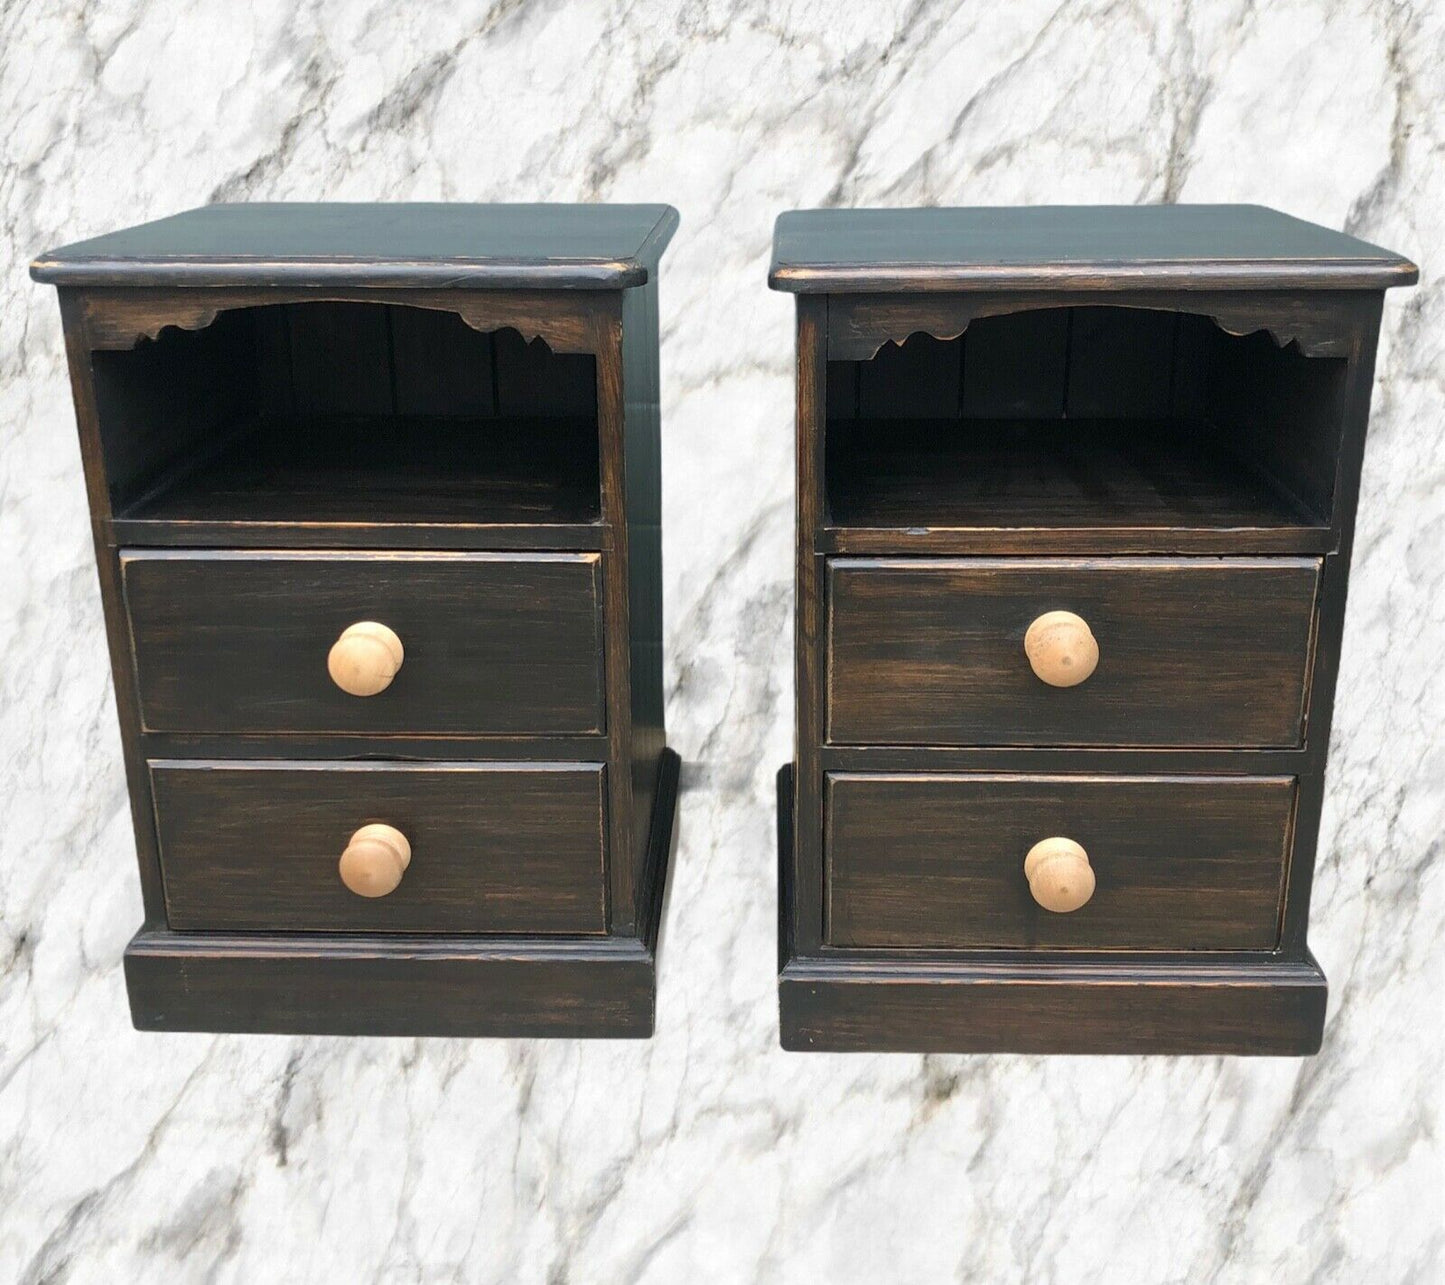 137.....A Pair Of Vintage Heavy Pine Bedside Cabinets / Bedside Chests